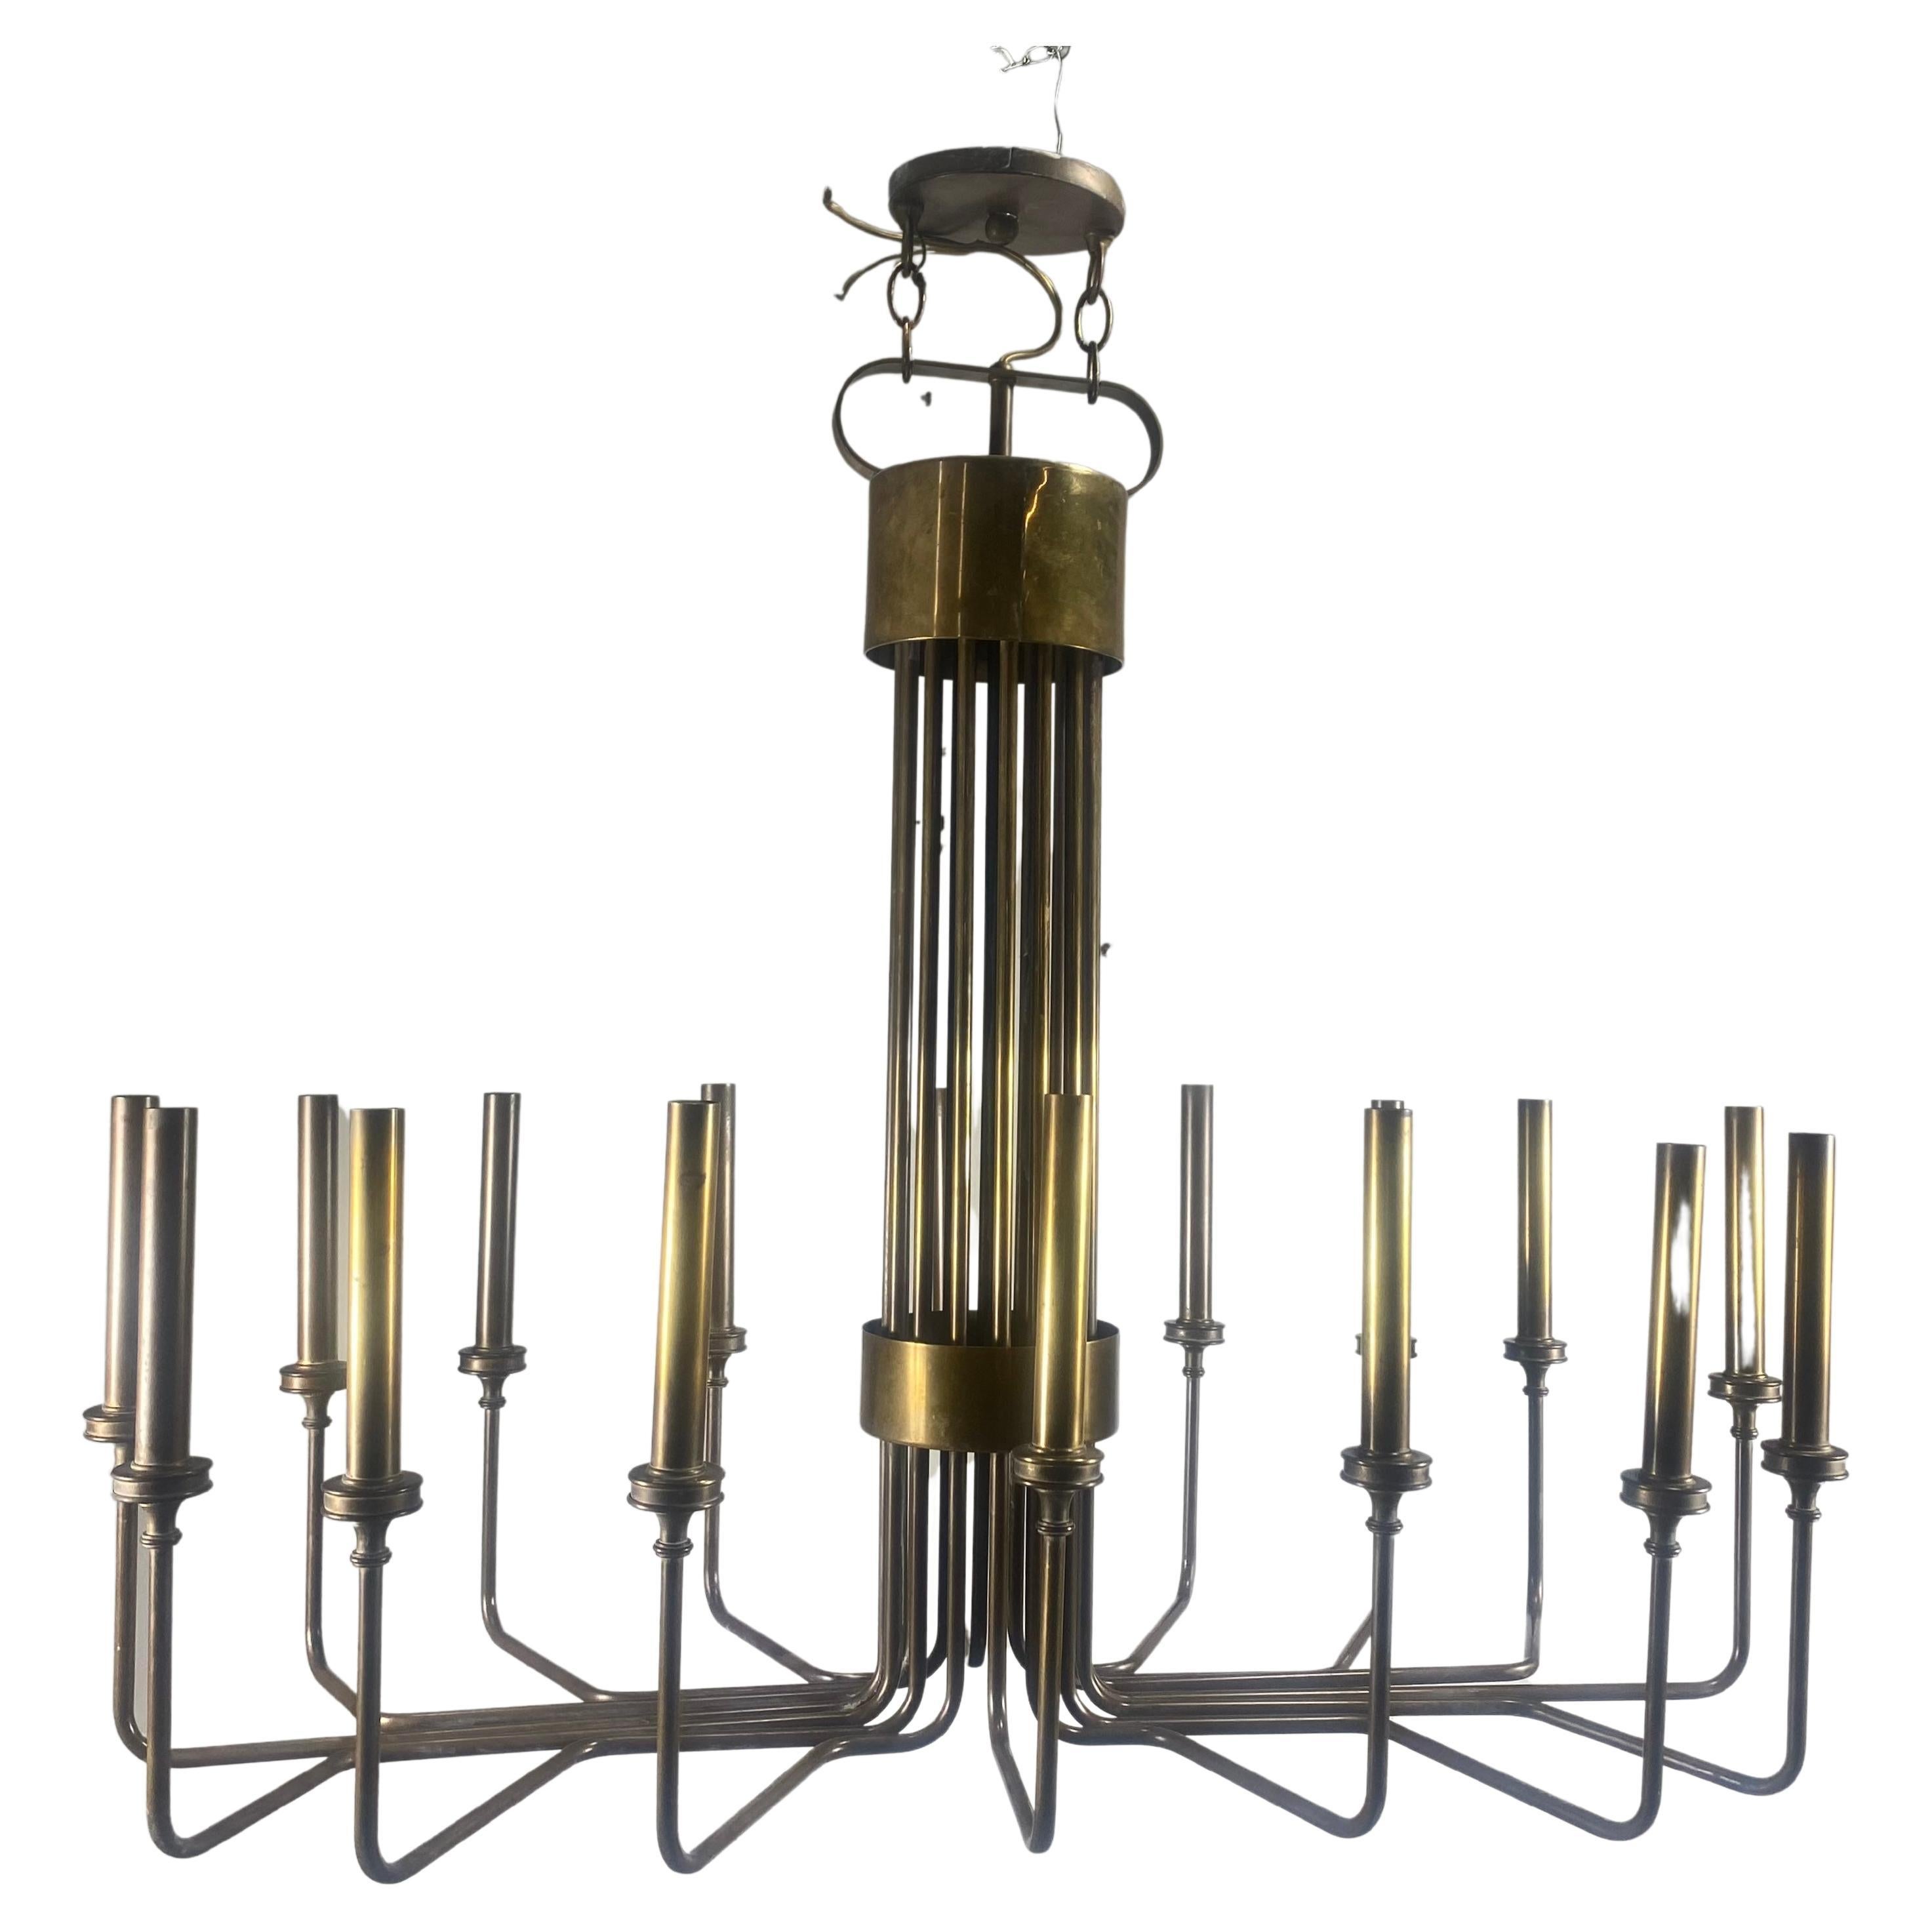 Hart Associates Brass Chandelier Attributed to Tommi Parzinger For Sale